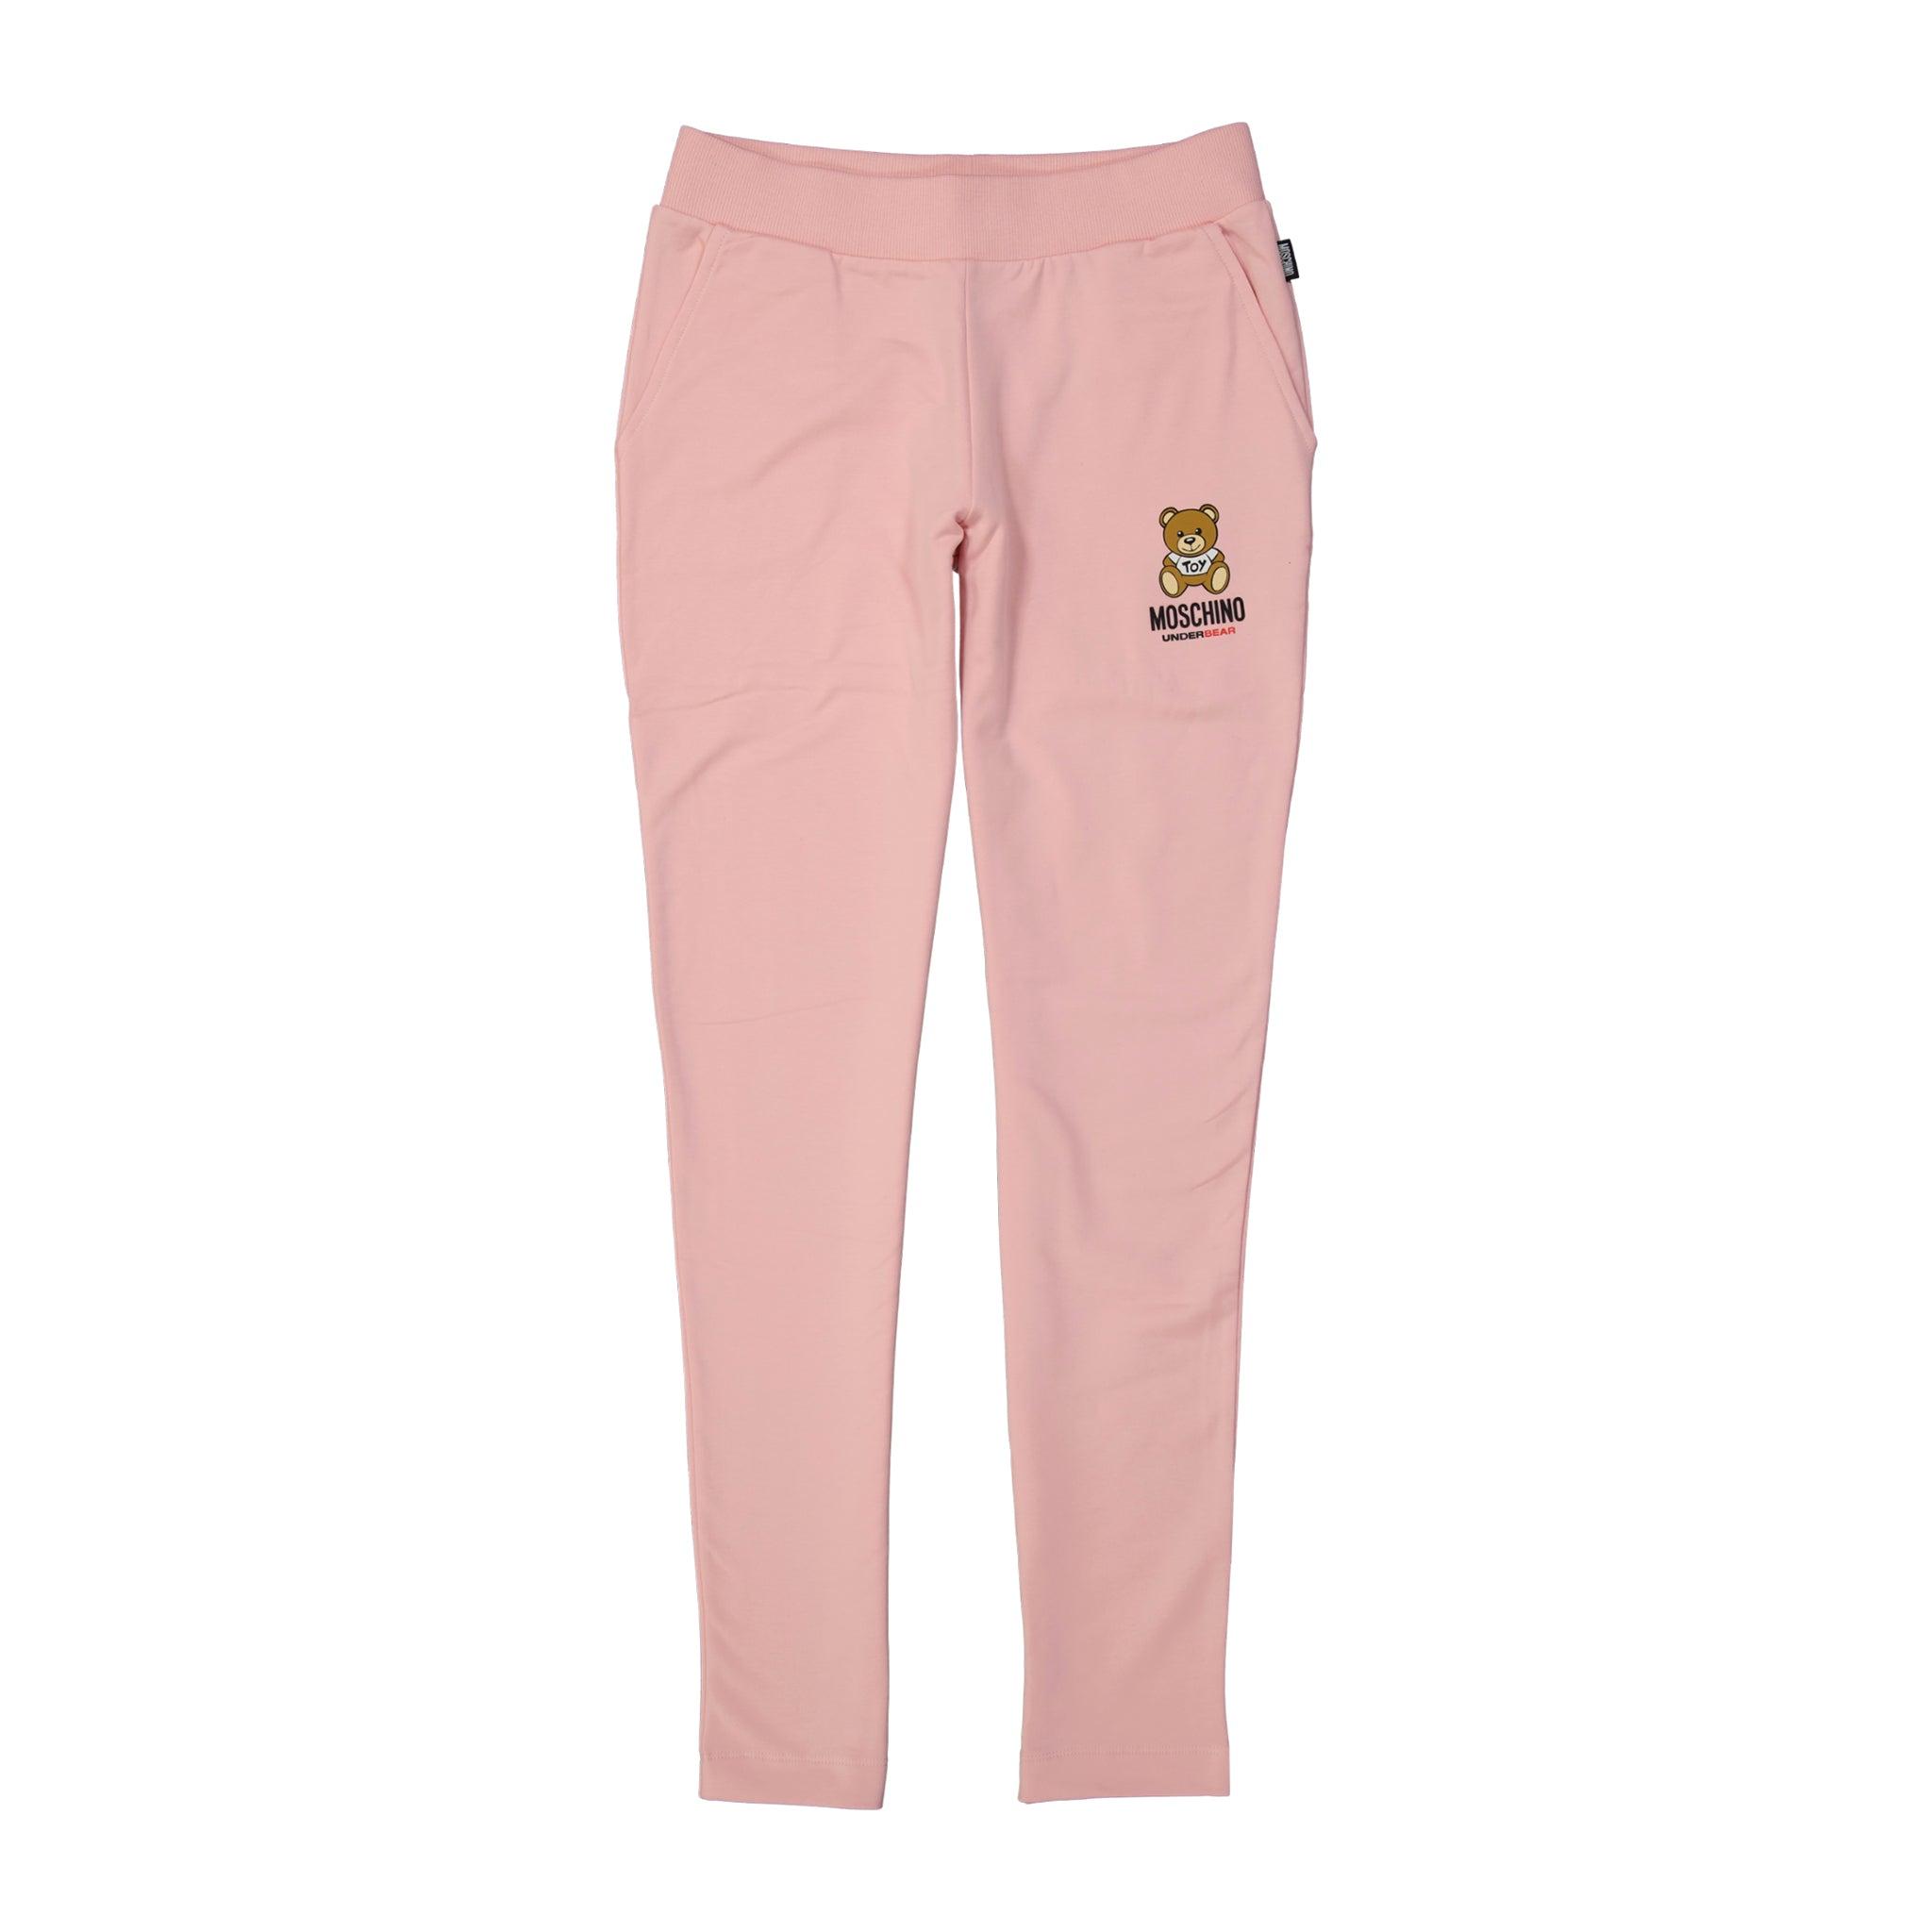 Moschino Logo Sweatpants in Pink | Lyst